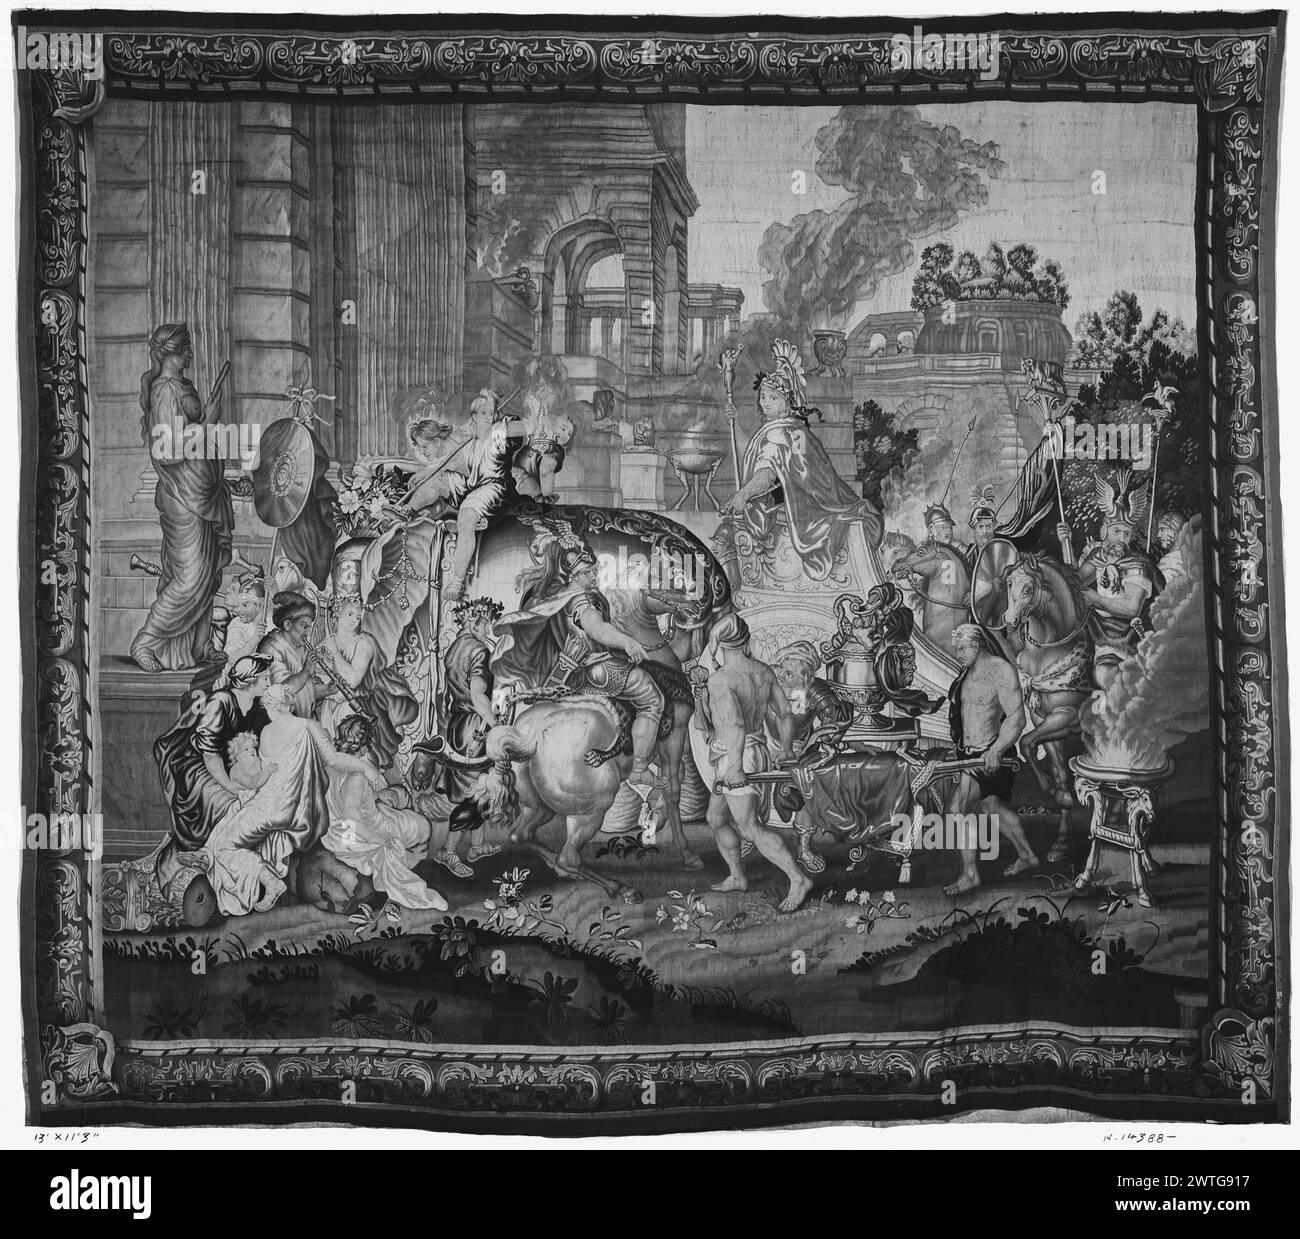 Entry of Alexander into Babylon. Le Brun, Charles (French, 1619-1690) (designed after) [painter] c. 1700-1725 Tapestry Dimensions: H 11'3' x W 13' Tapestry Materials/Techniques: unknown Culture: Flemish Ownership History: French & Co. received from P. Lorillard, invoiced 11/18/1929. United States, New York, New York, Harvard Club of New York City. Alexander triumphantly enters Babylon in his chariot drawn by elephant (center, middle ground); Alexander points down to man on horse, Governor of Babylon, who directs 2 men carrying large vase (center, foreground); large statue of Queen Semiramis (R Stock Photo